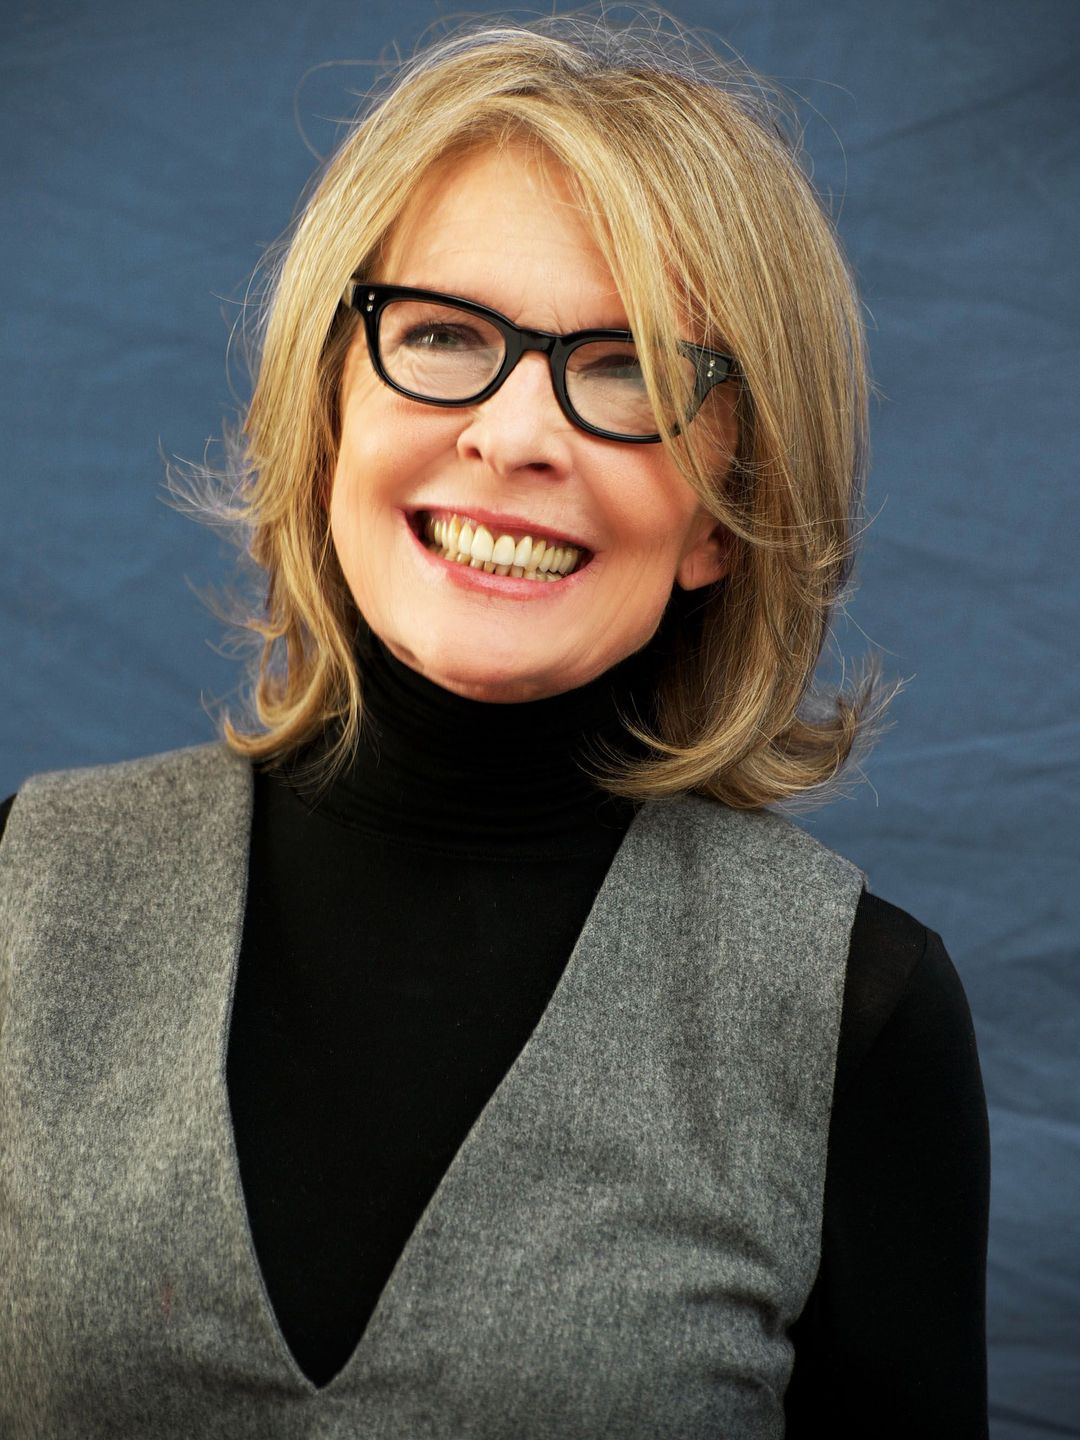 Diane Keaton in her youth